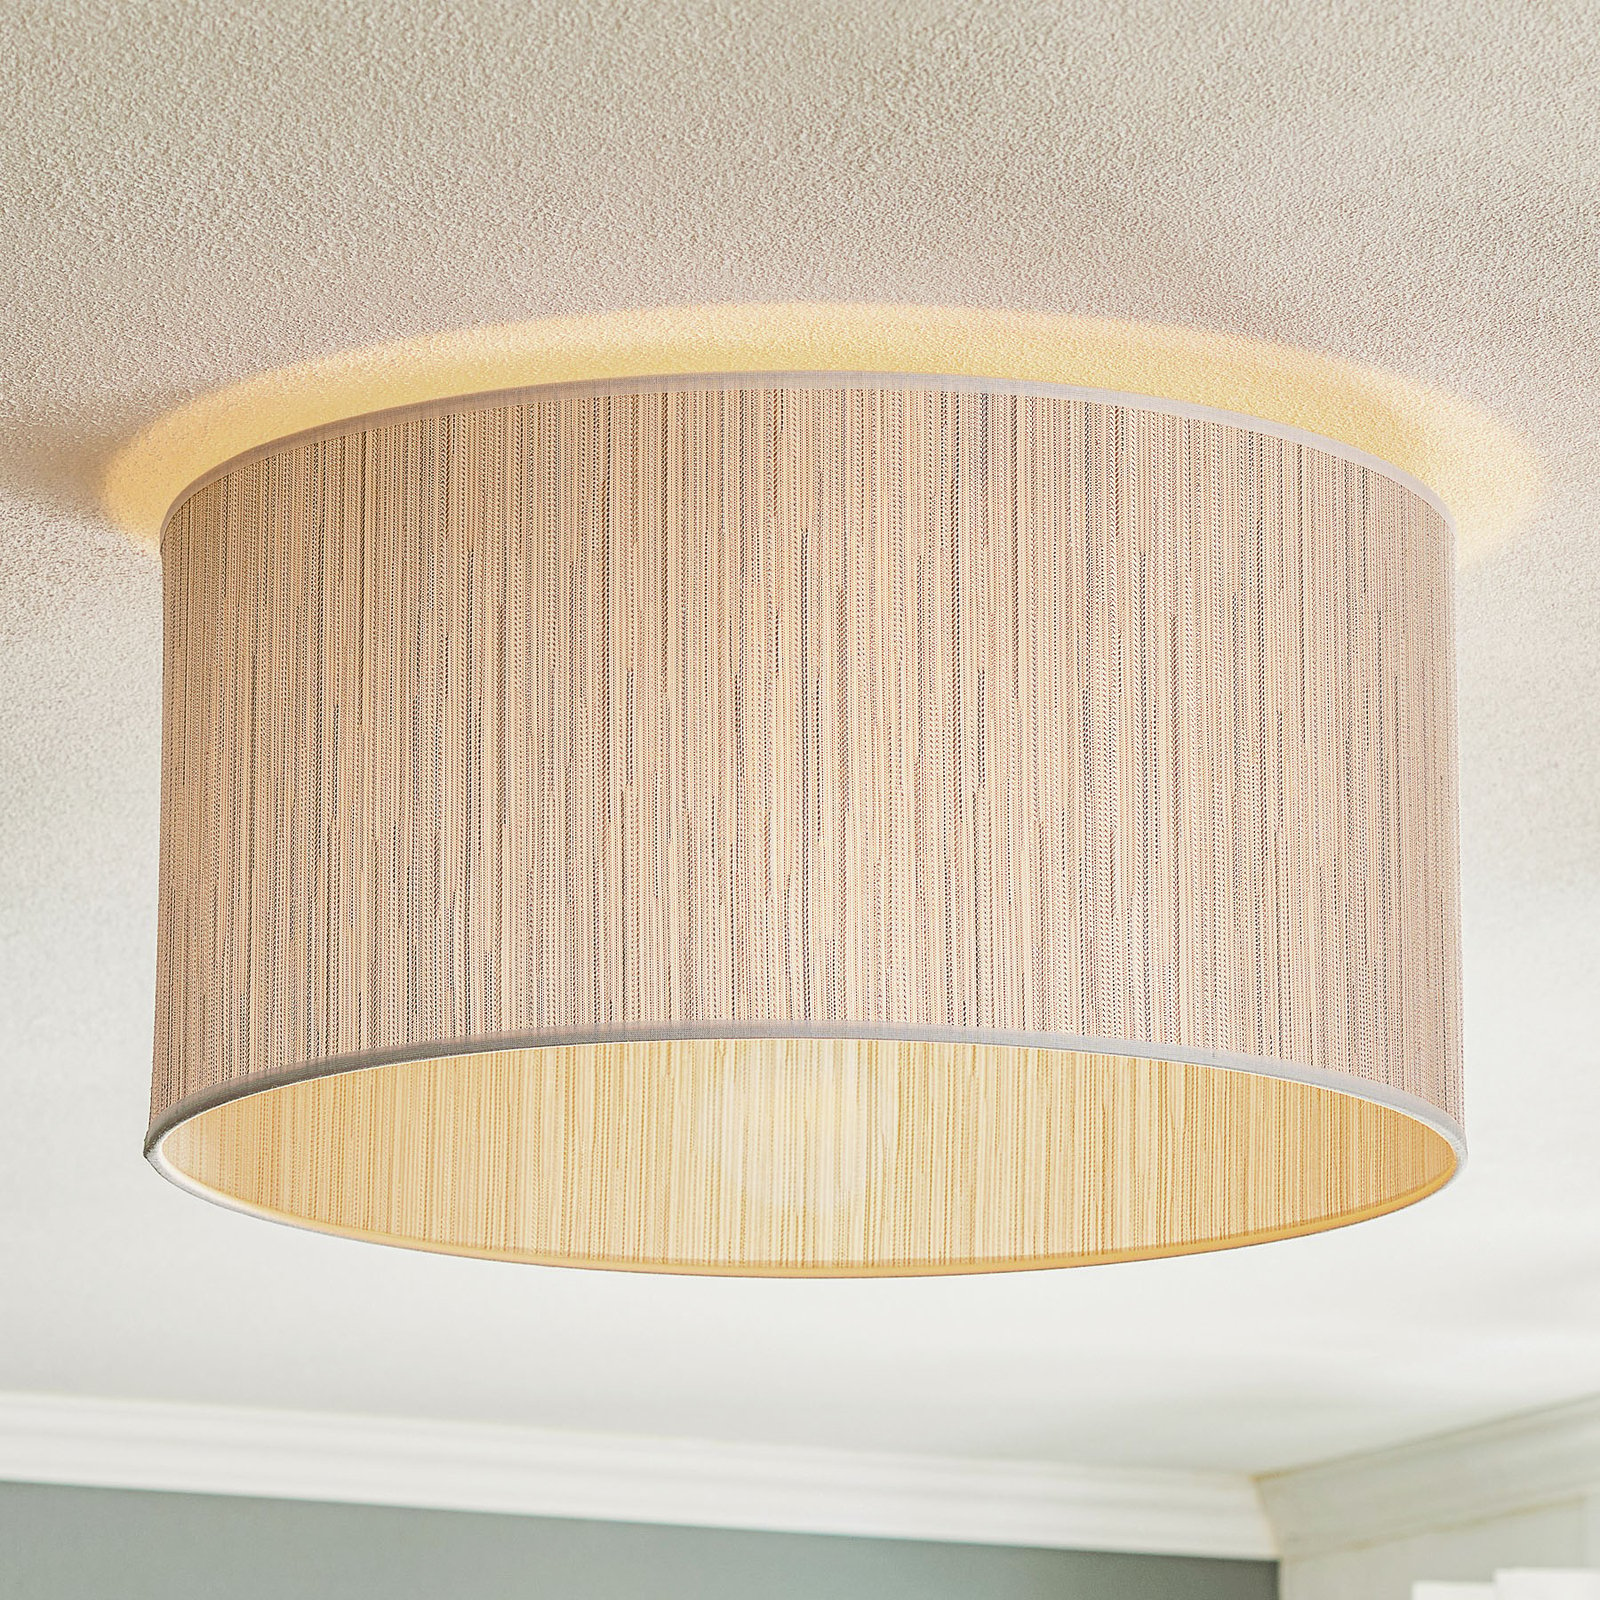 Essex ceiling light, textured fabric, silver